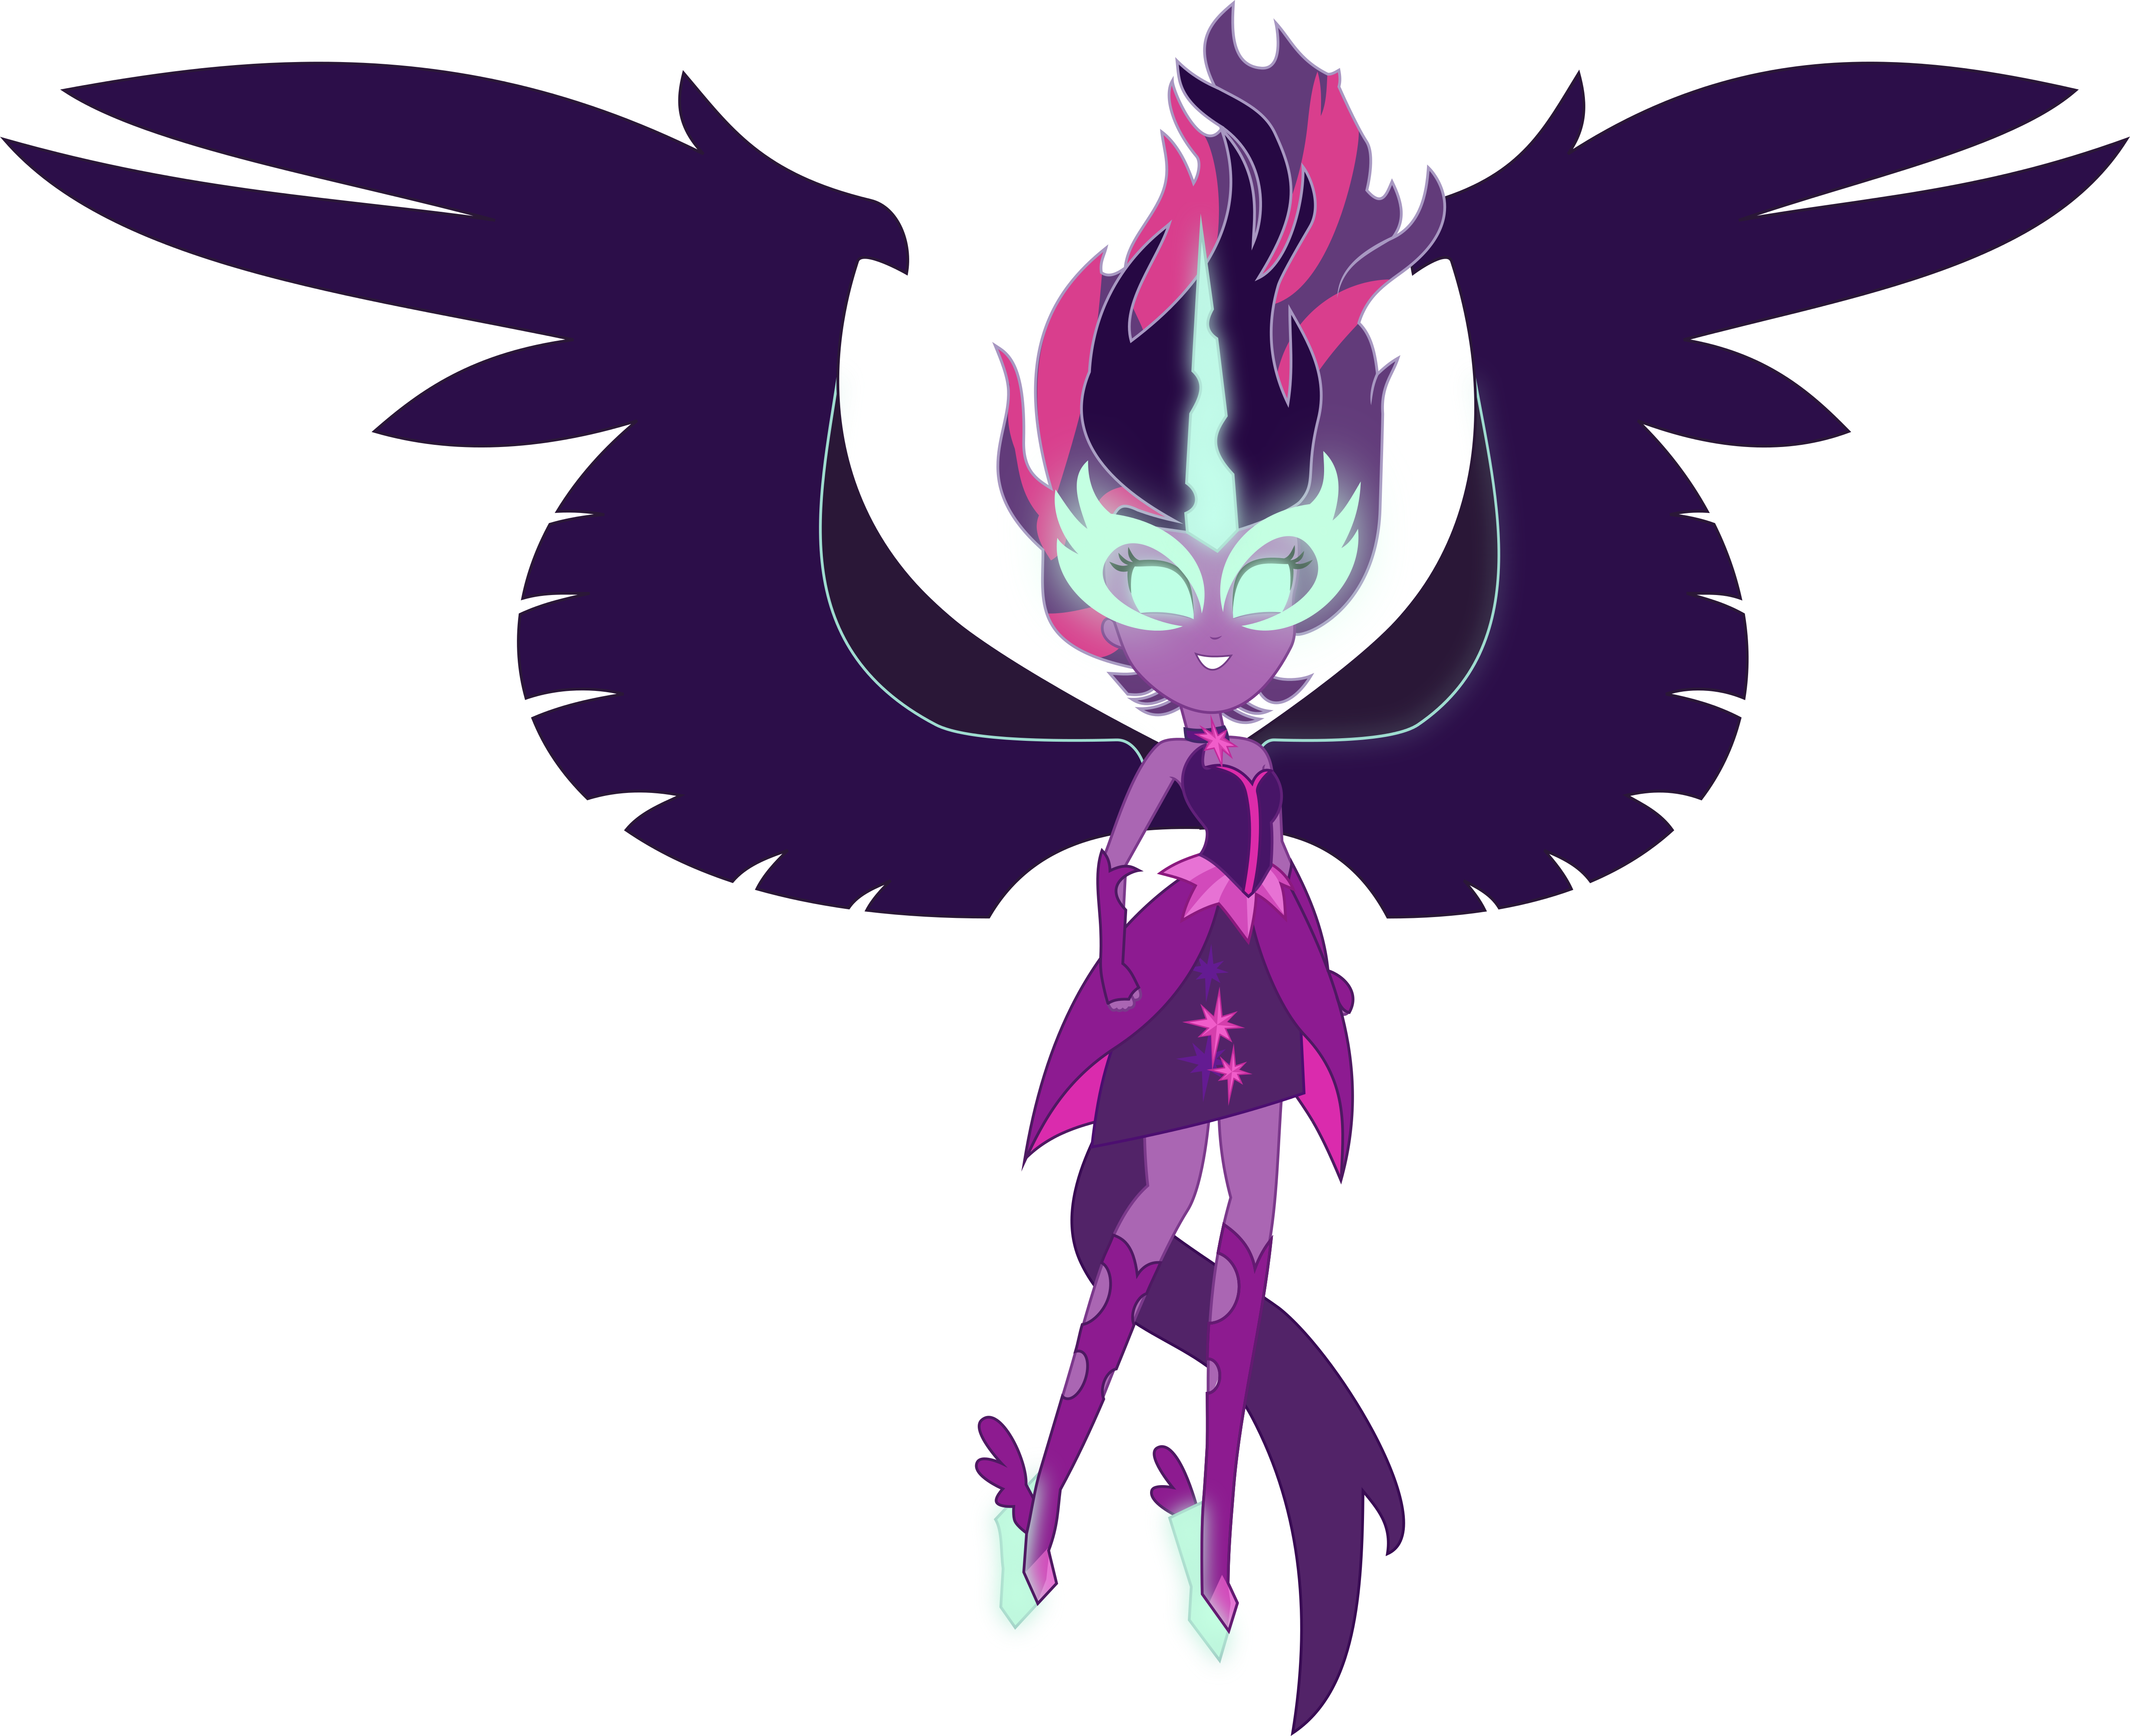 To Be Honest, I Absolutely Love Her Design - My Little Pony Equestria Girls Magic (4908x4000)